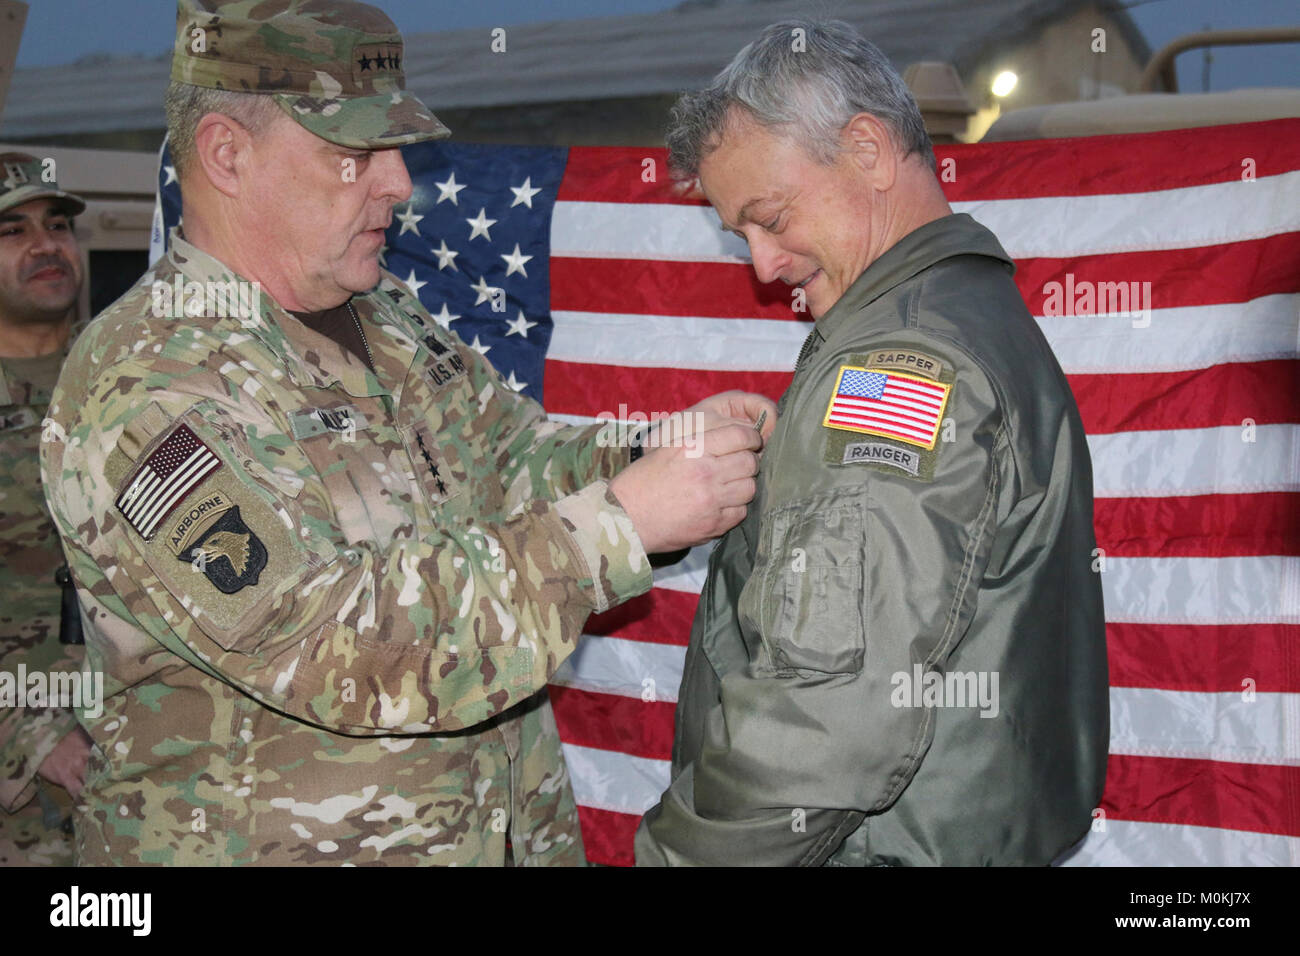 Army Chief of Staff Gen. Mark A. Milley promotes actor Gary Sinise, formerly known as 1st Lt. Dan Taylor, to the rank of captain at Taji Military Complex, Iraq, Dec. 21, 2017. Combined Joint Task Force – Operation Inherent Resolve is the global Coalition to defeat ISIS in Iraq and Syria. (U.S. Army Stock Photo